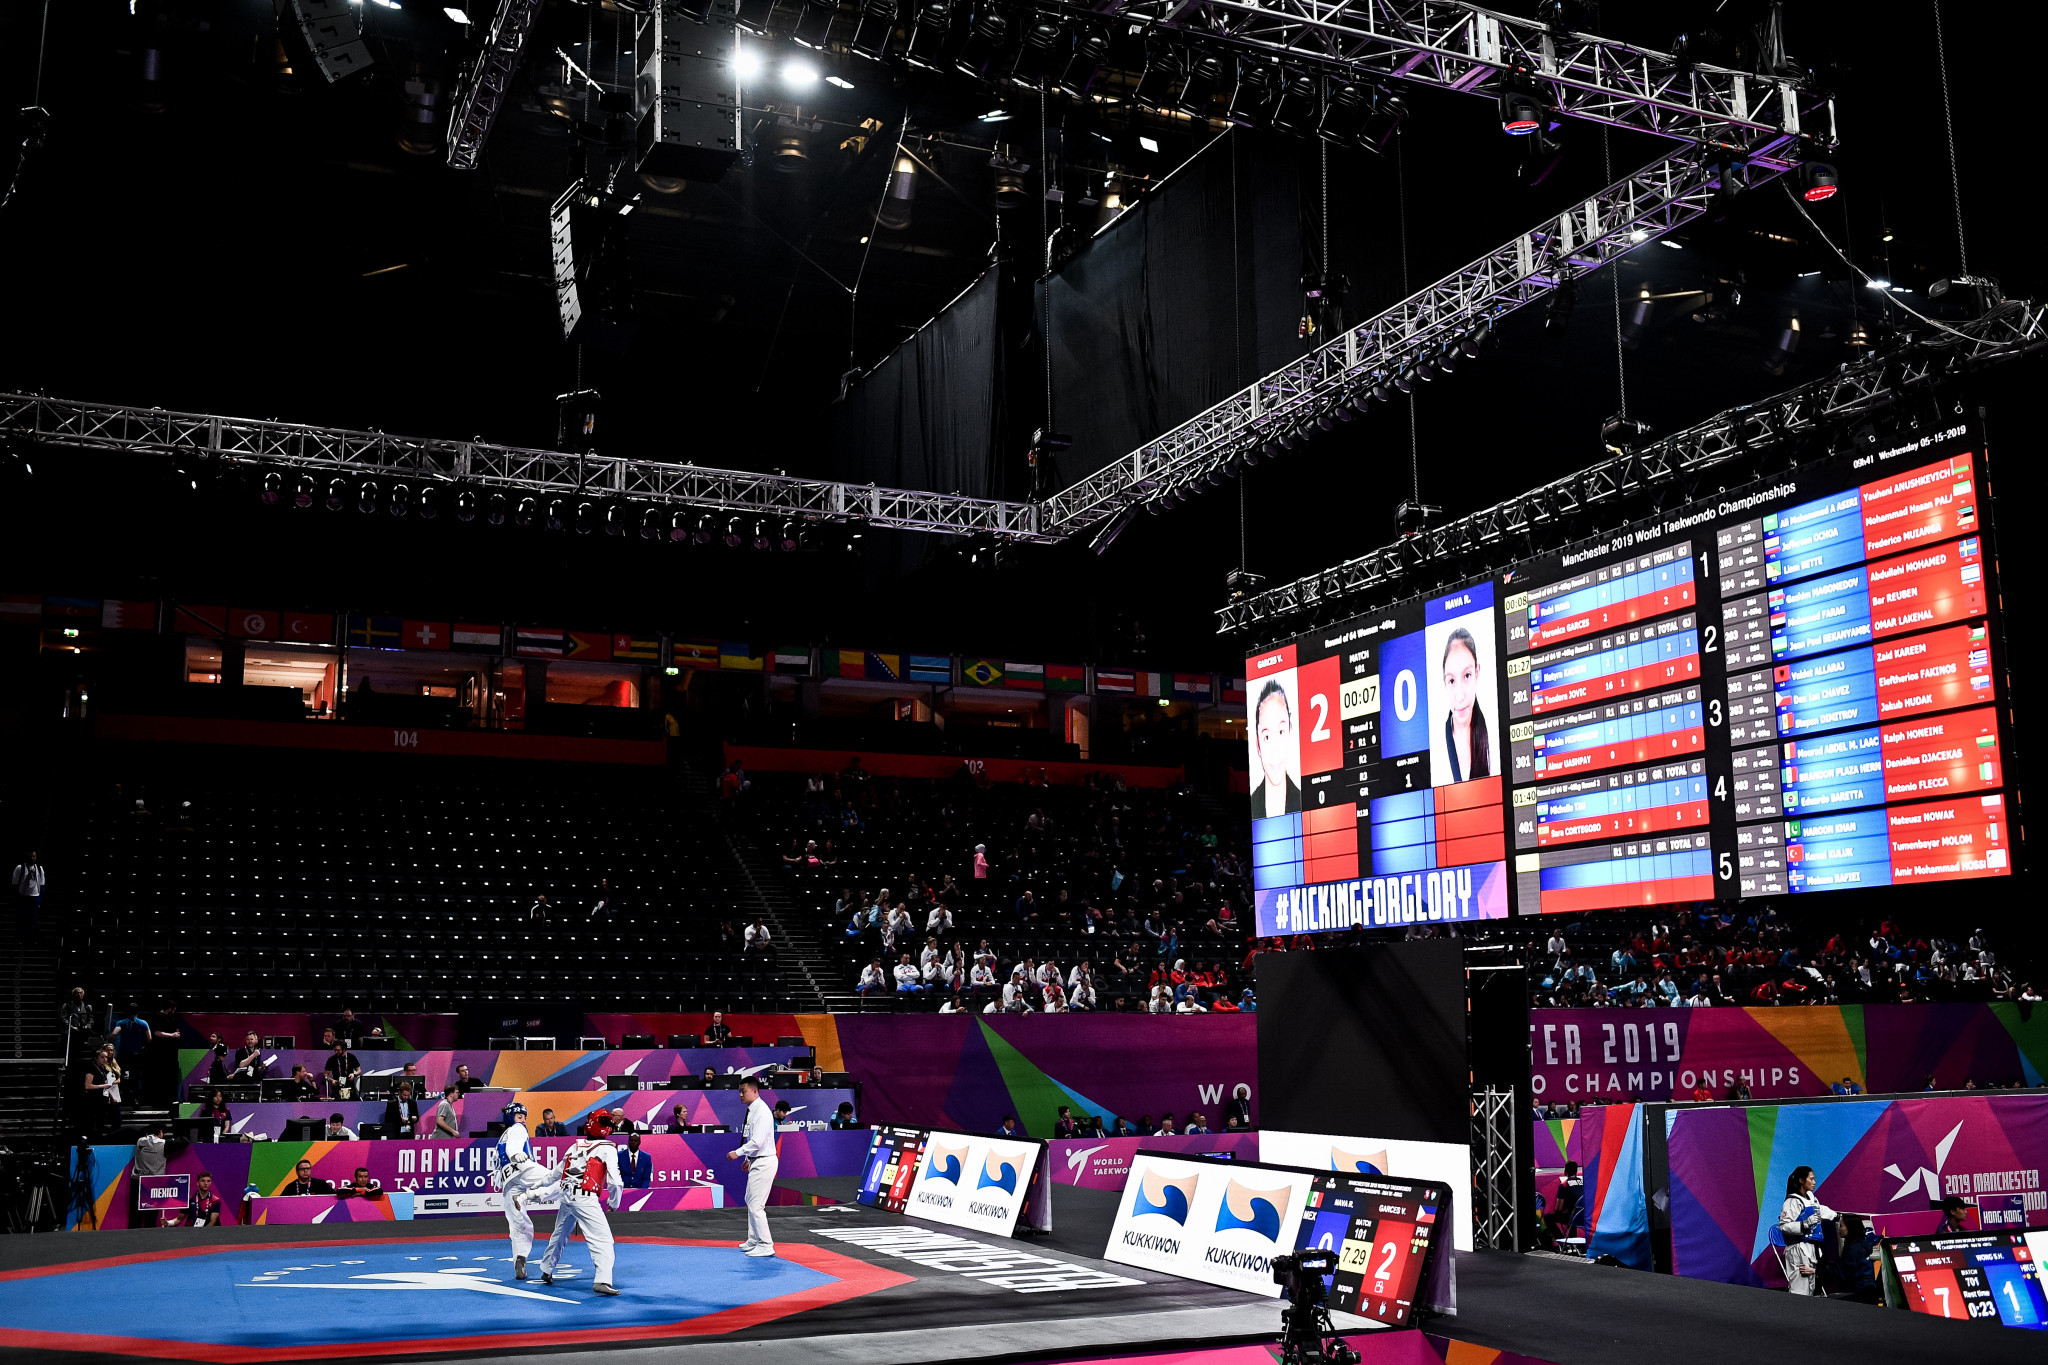 The final day of the World Championships will take place at Manchester Arena tomorrow ©World Taekwondo